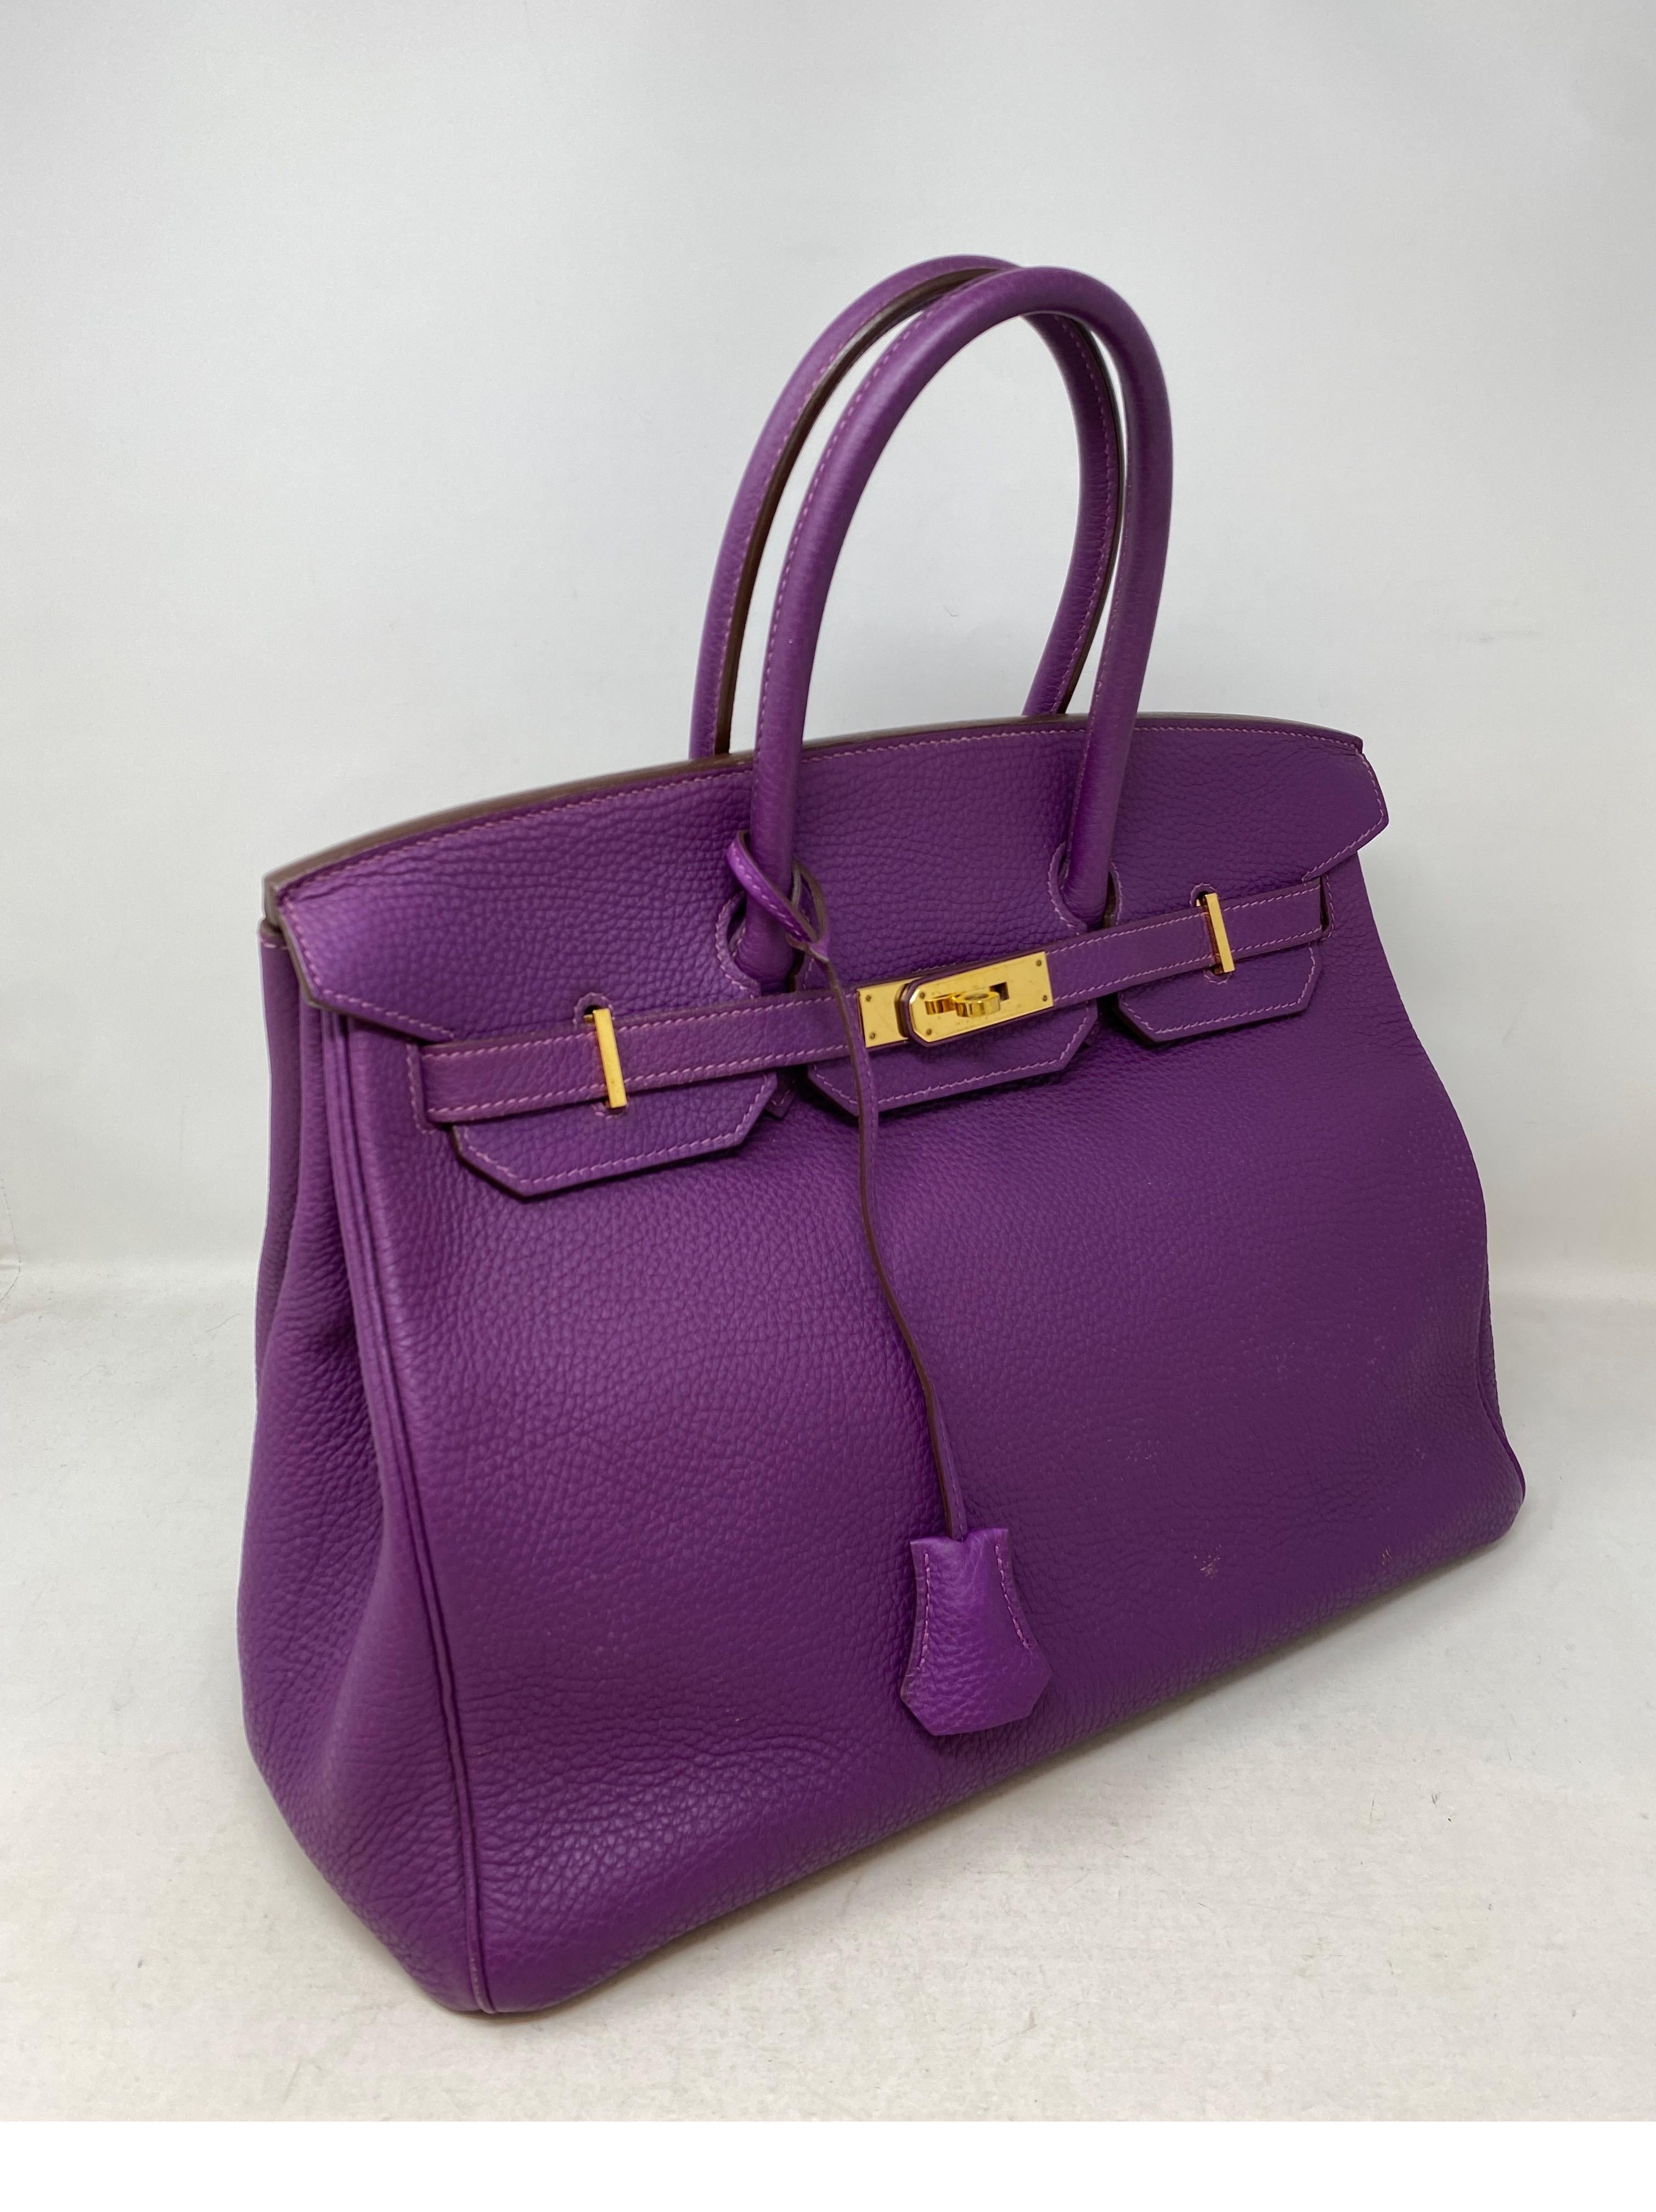 Hermes Anemone Purple Birkin 35 Bag. Good condition. Light spots on leather bottom front. Please see all photos. Interior clean. Rare purple color. Beautiful color and bag. Includes clochette, lock, keys, and dust bag. Guaranteed authentic. 